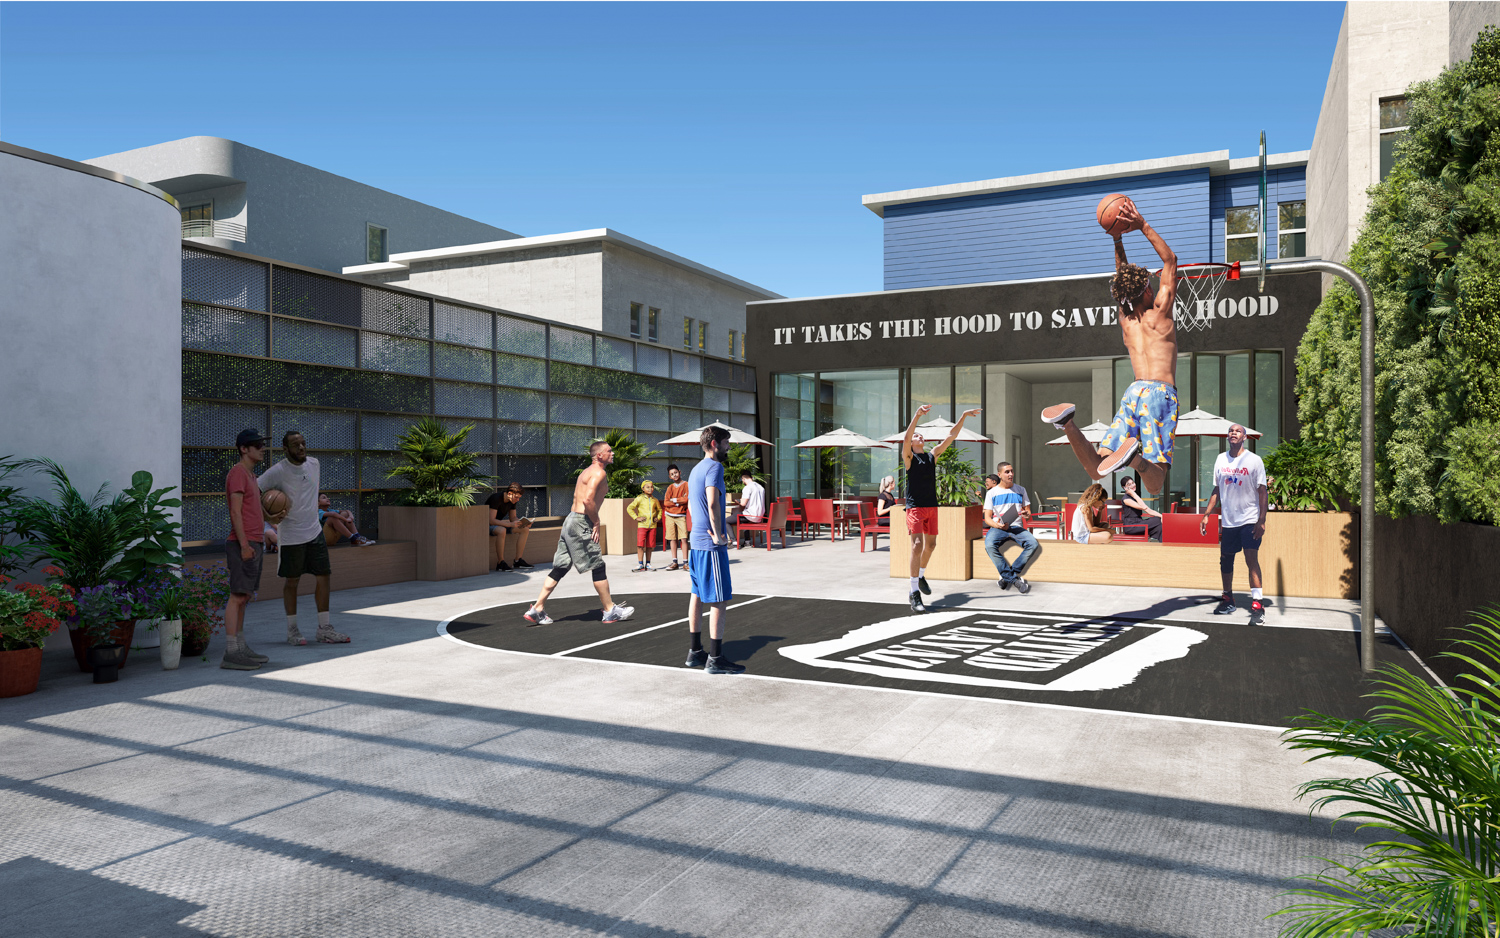 United Playaz Clubhouse rooftop basketball court, rendering by Arquitectonica